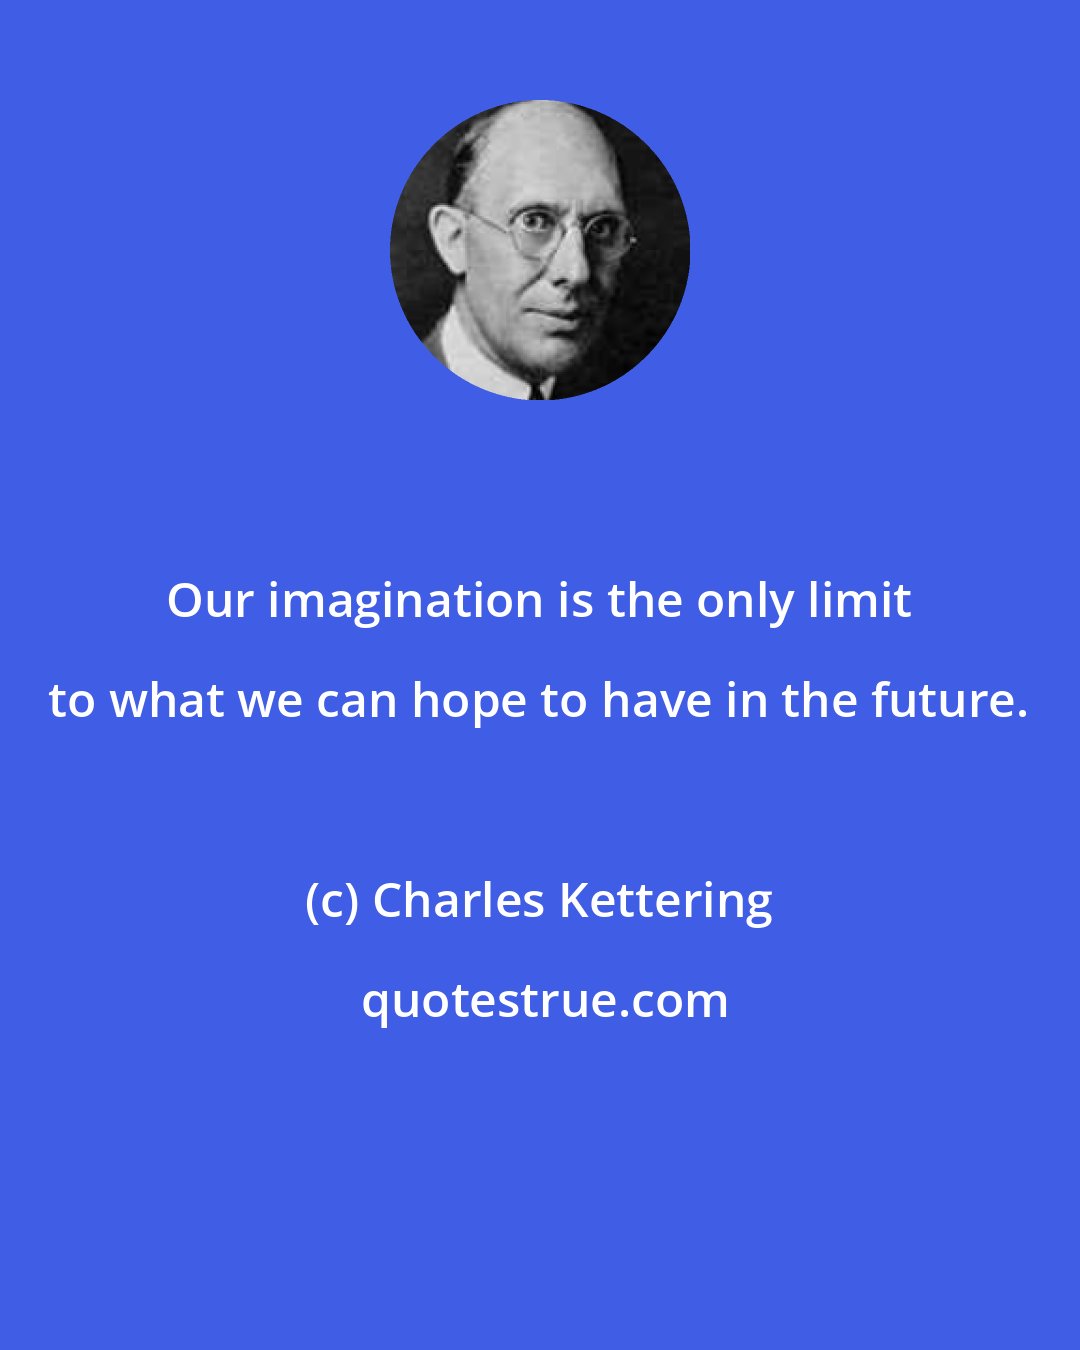 Charles Kettering: Our imagination is the only limit to what we can hope to have in the future.